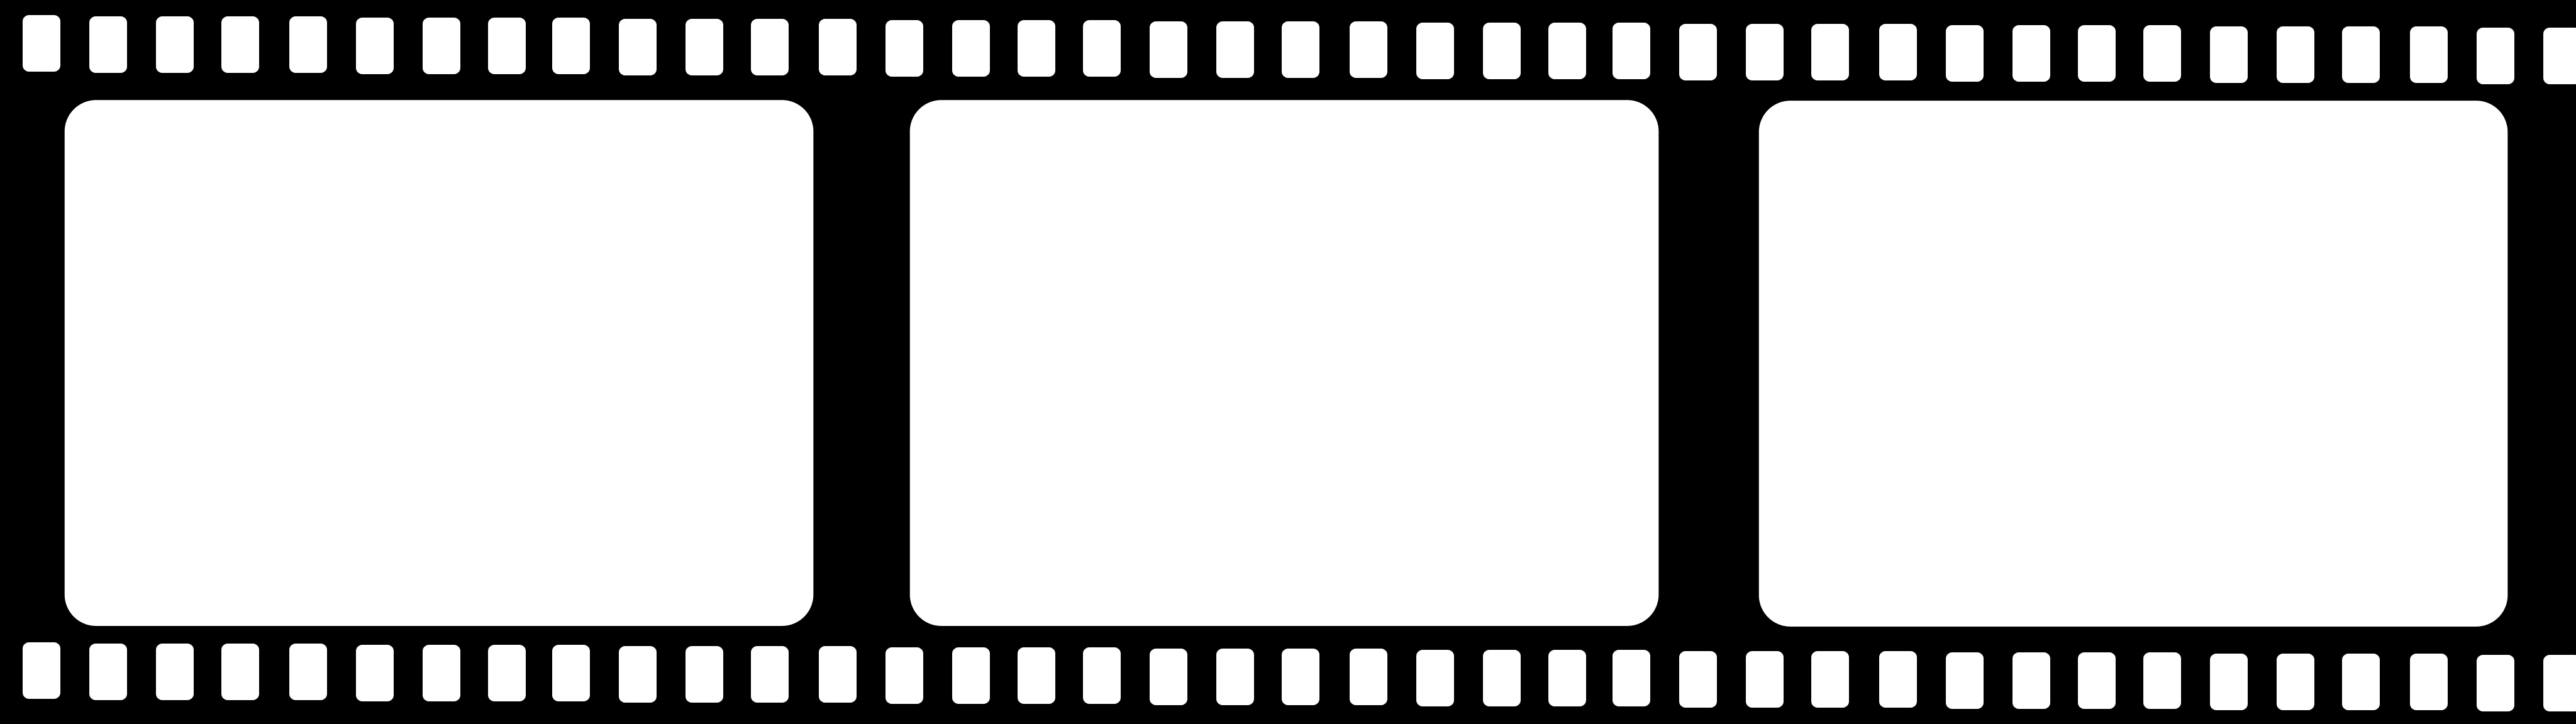 27 Movie Reel Logo Free Cliparts That You Can Download To You Computer